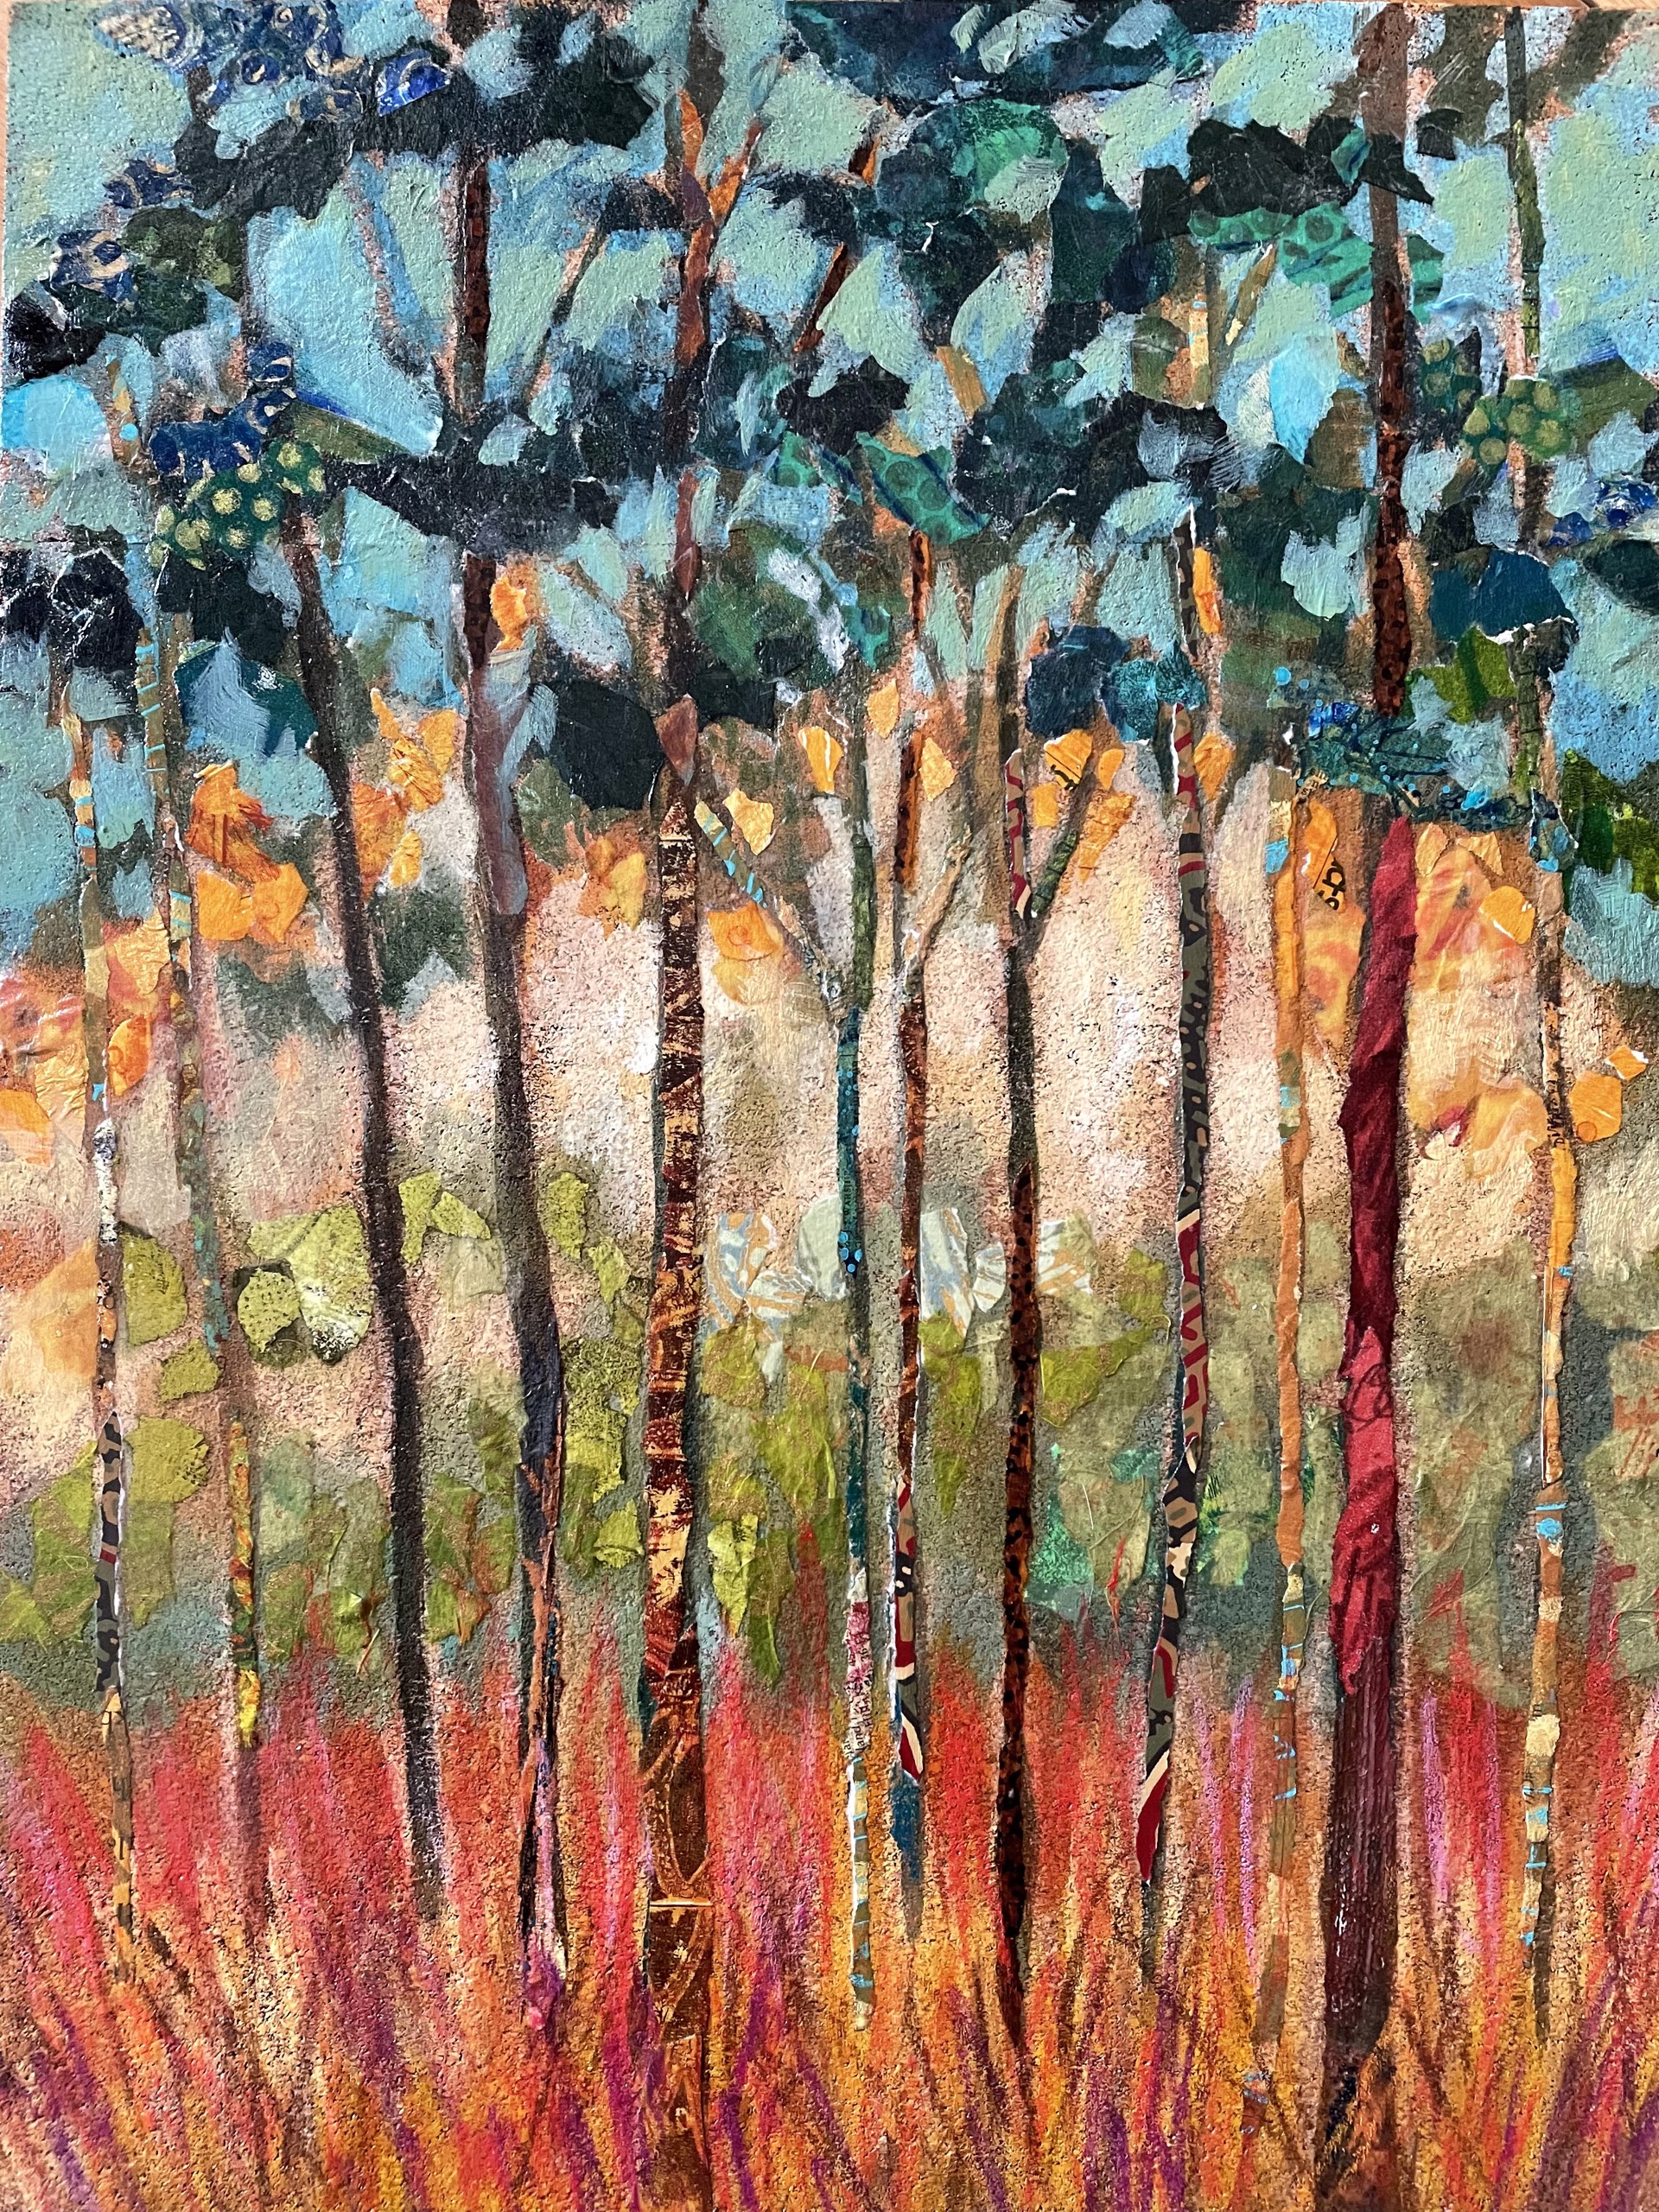 Among the Pines - SOLD by Elizabeth St. Hilaire